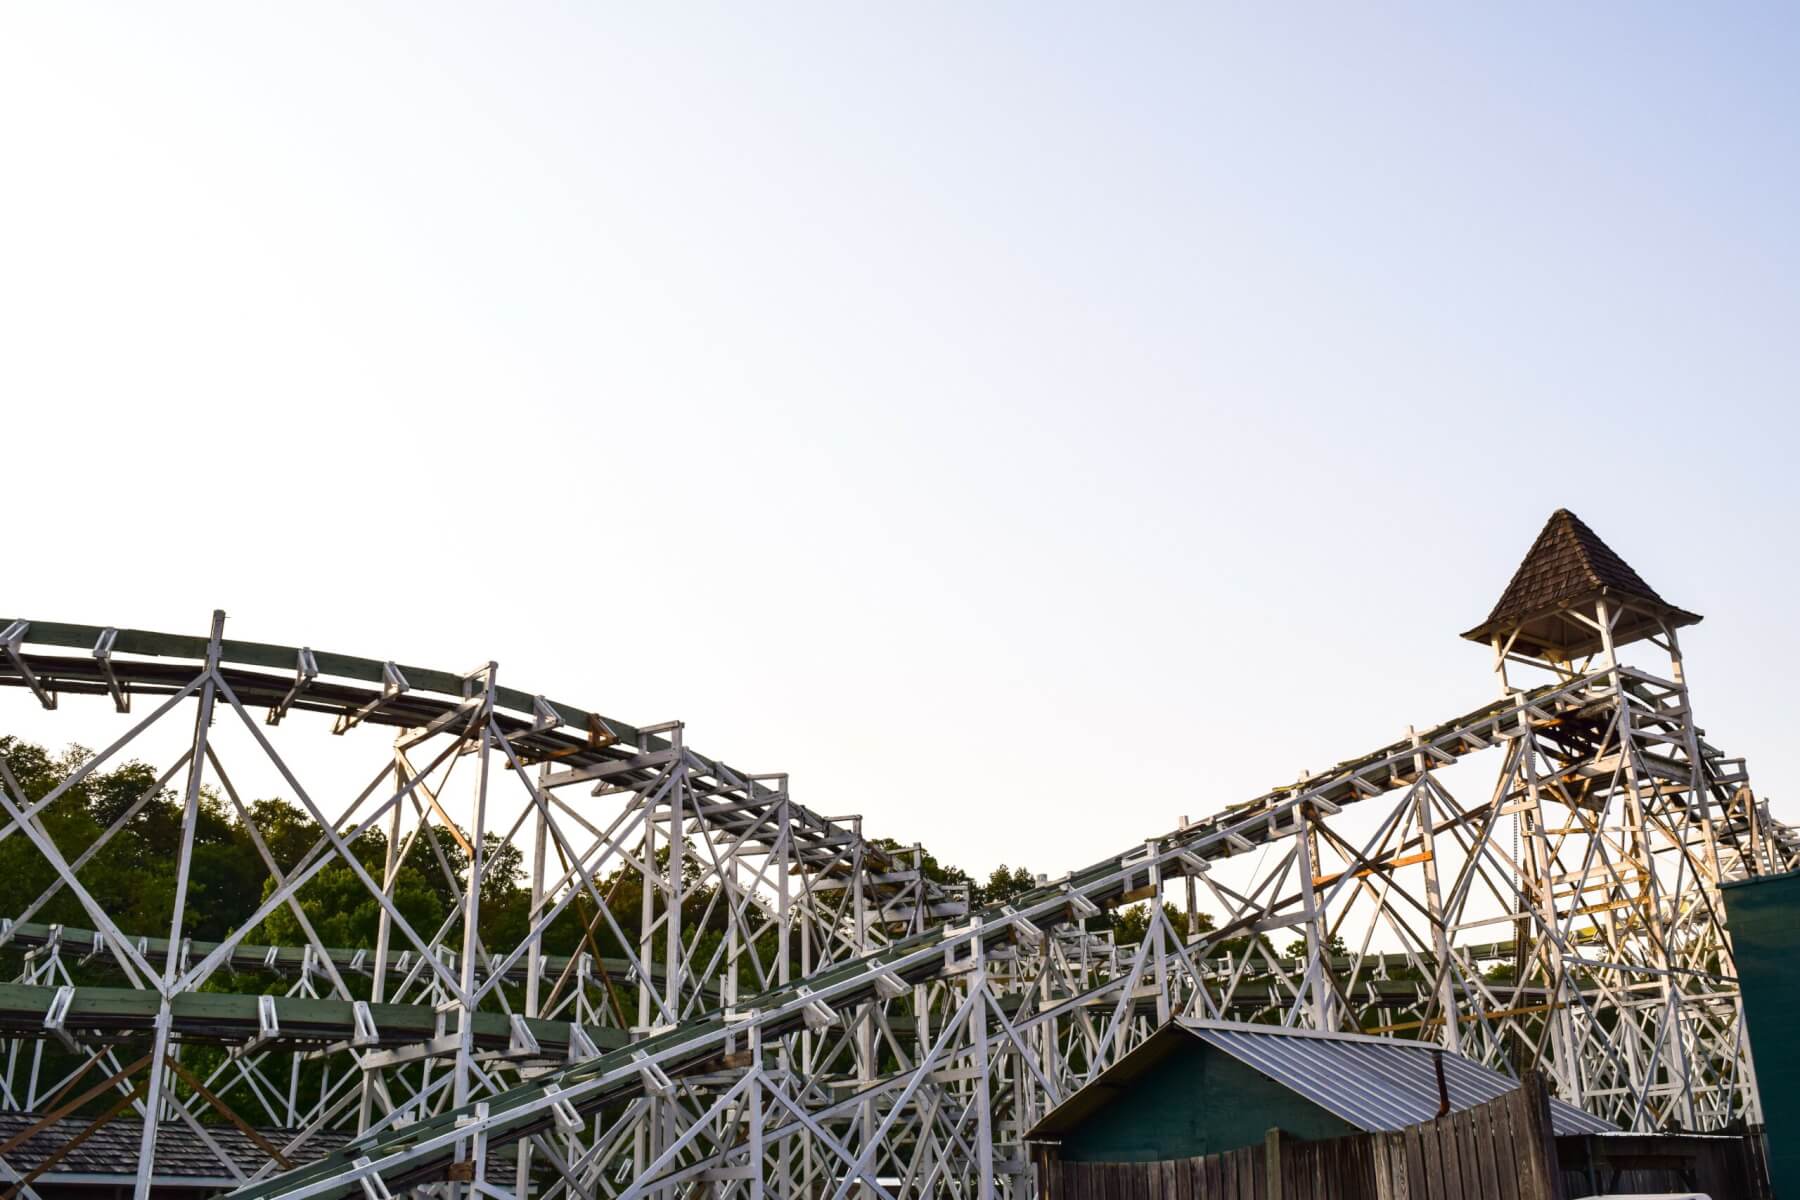 Roller coaster at Lakemont Park